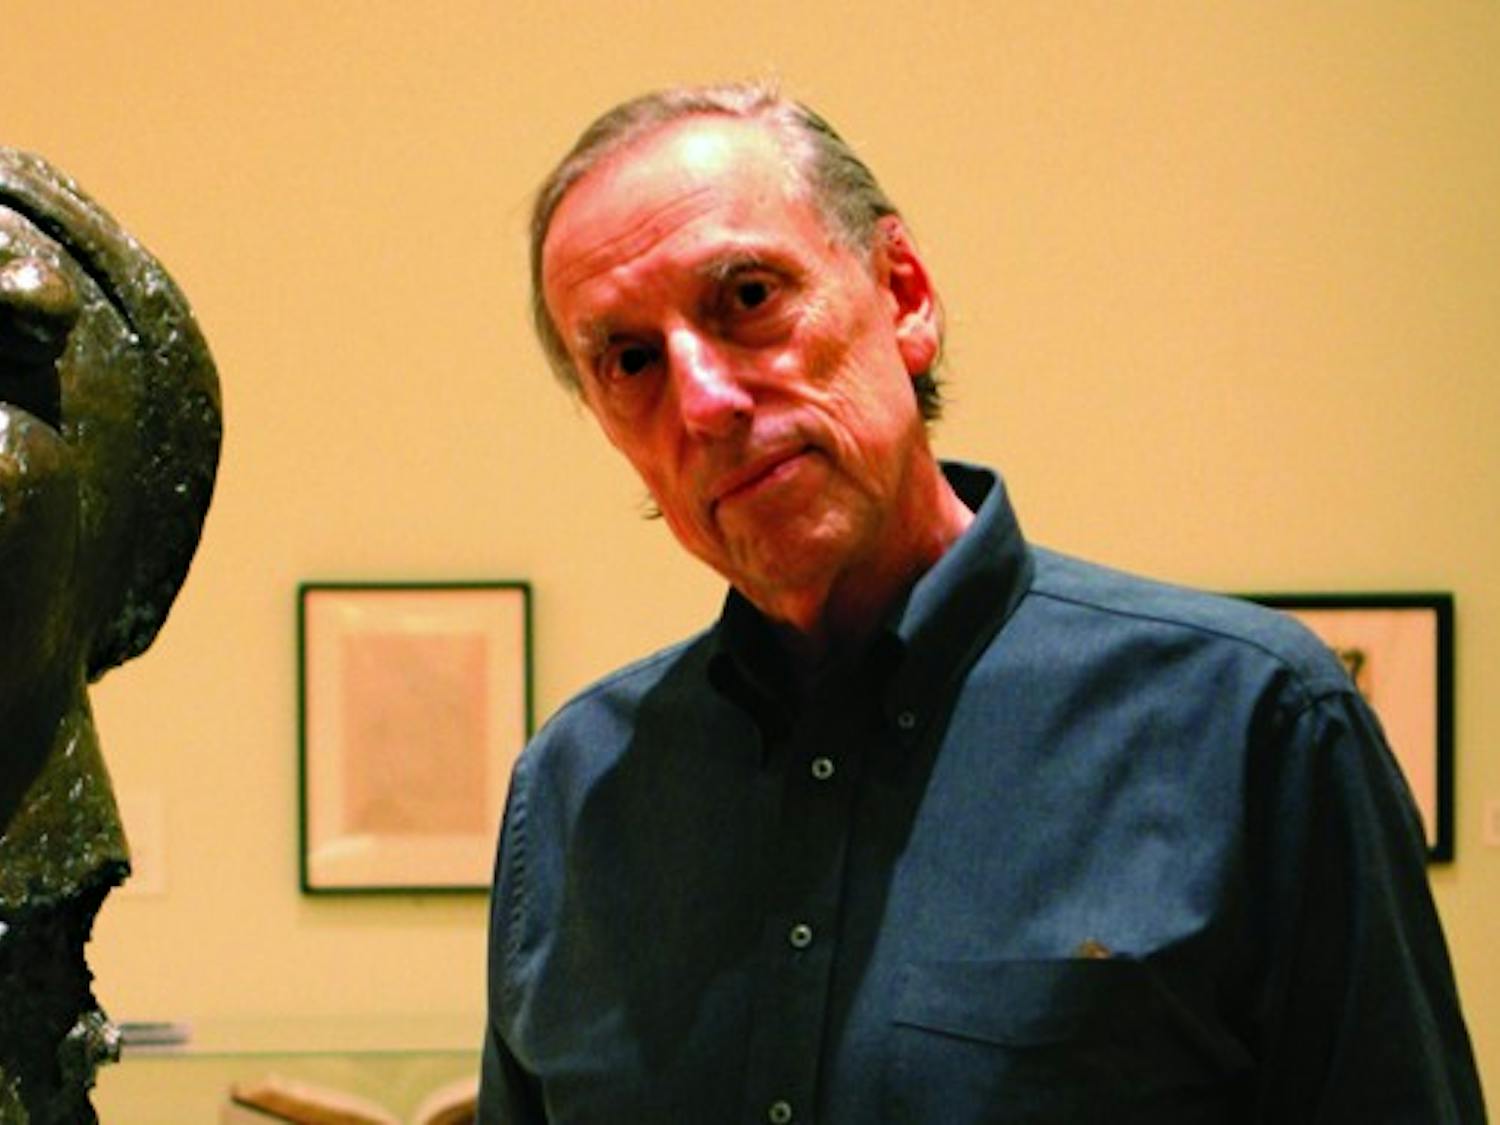 Ariel Dorfman considers himself a collaborator to Picasso in his play, first performed in Washington D.C. in 2006.